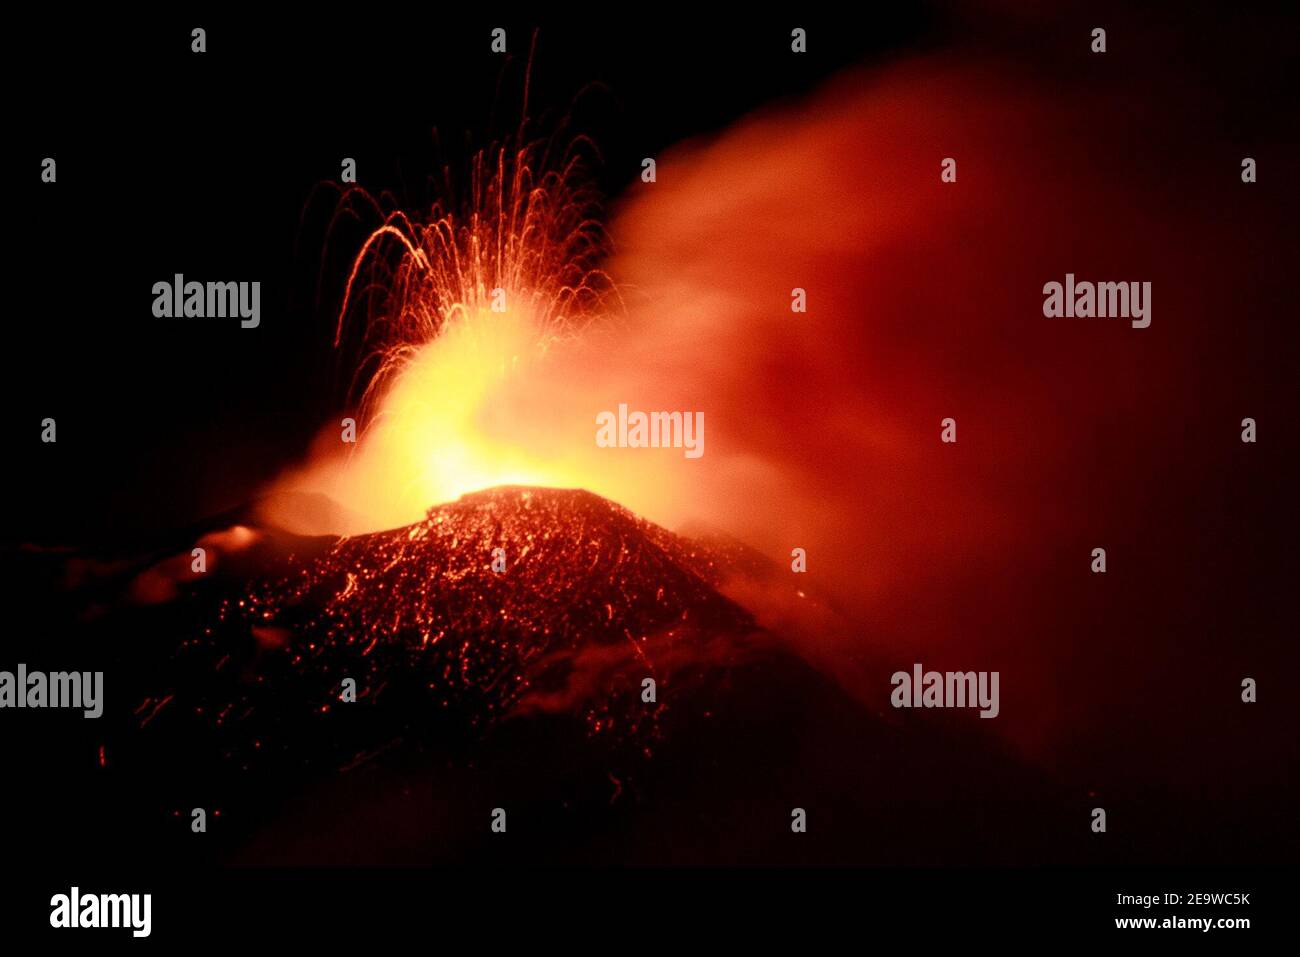 Zafferana Etnea, Italy. 05th Feb, 2021. 2/5/2021 - Fornazzo (Ct) An intense Strombolian activity continues from various mouths present at the bottom of the Bocca Nuova Crater, with the launch of material that even goes beyond the crater rim. Strombolian and effusive activity is observed at the Voragine Crater feeding a small intra-crater lava flow directed towards Bocca Nuova. The intra-crater explosive activity at the Northeast Crater also continues. Editorial Usage Only (Photo by IPA/Sipa USA) Credit: Sipa USA/Alamy Live News Stock Photo